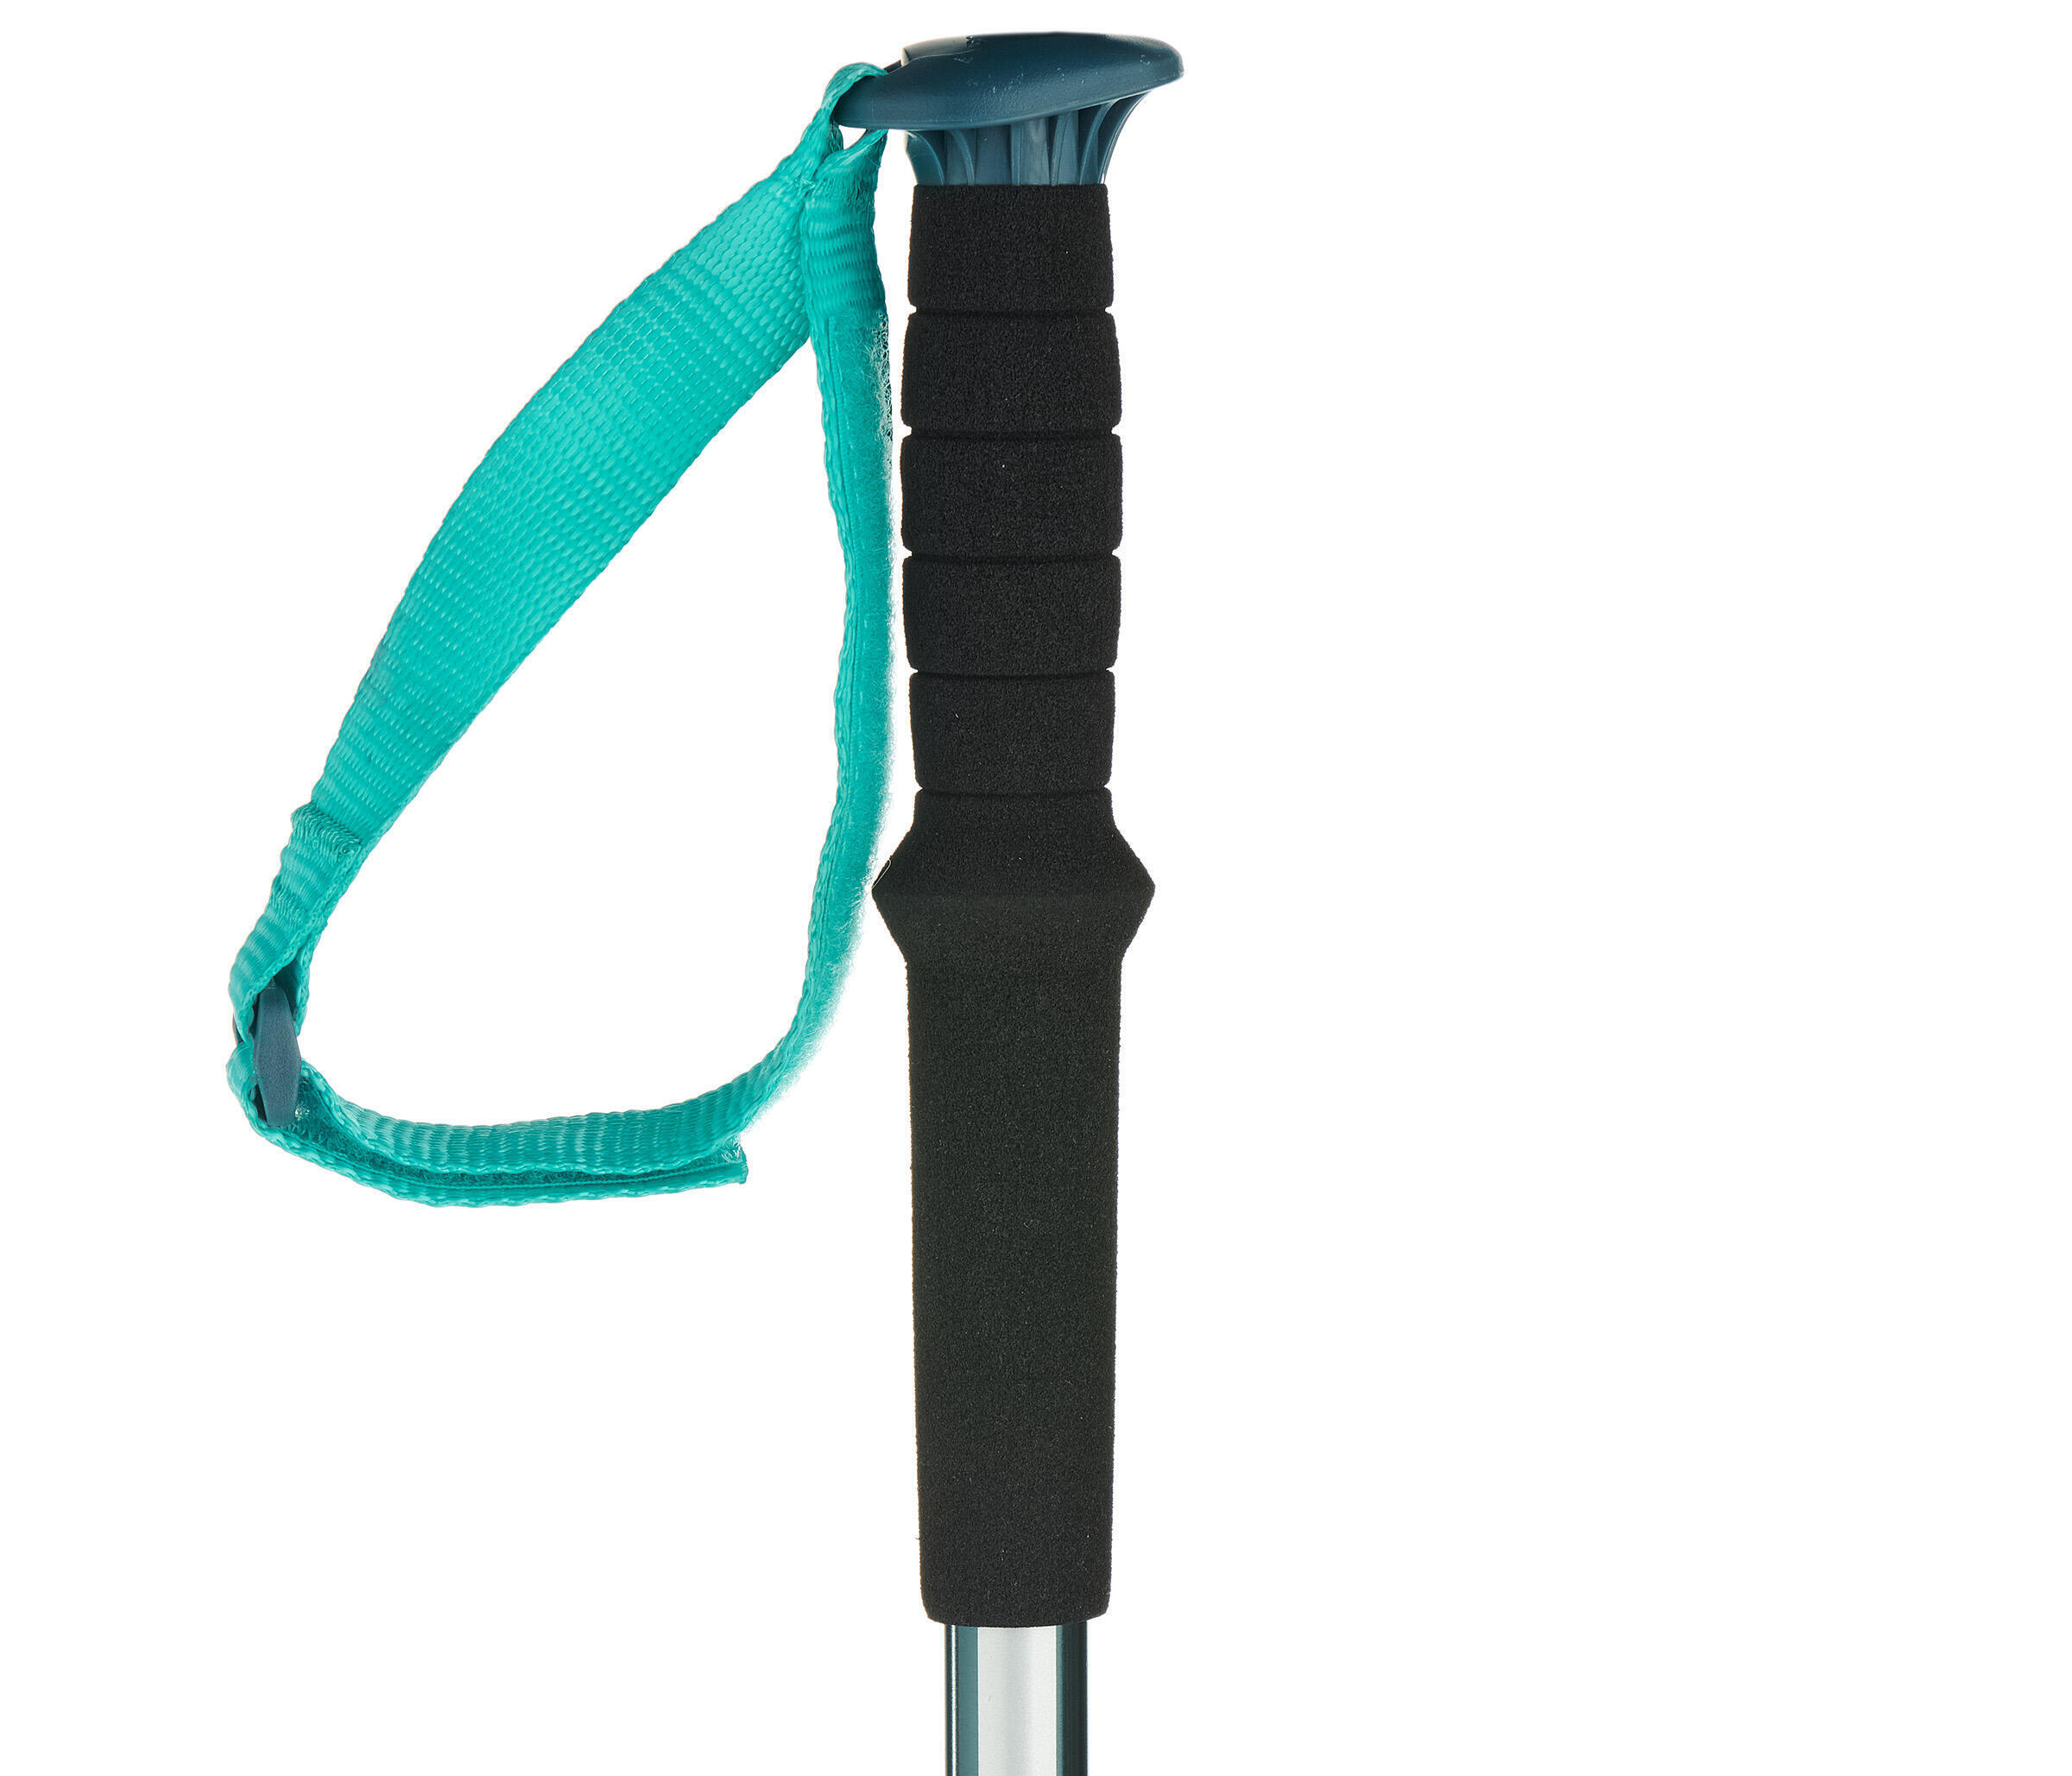 How to adjust the strap on your hiking pole